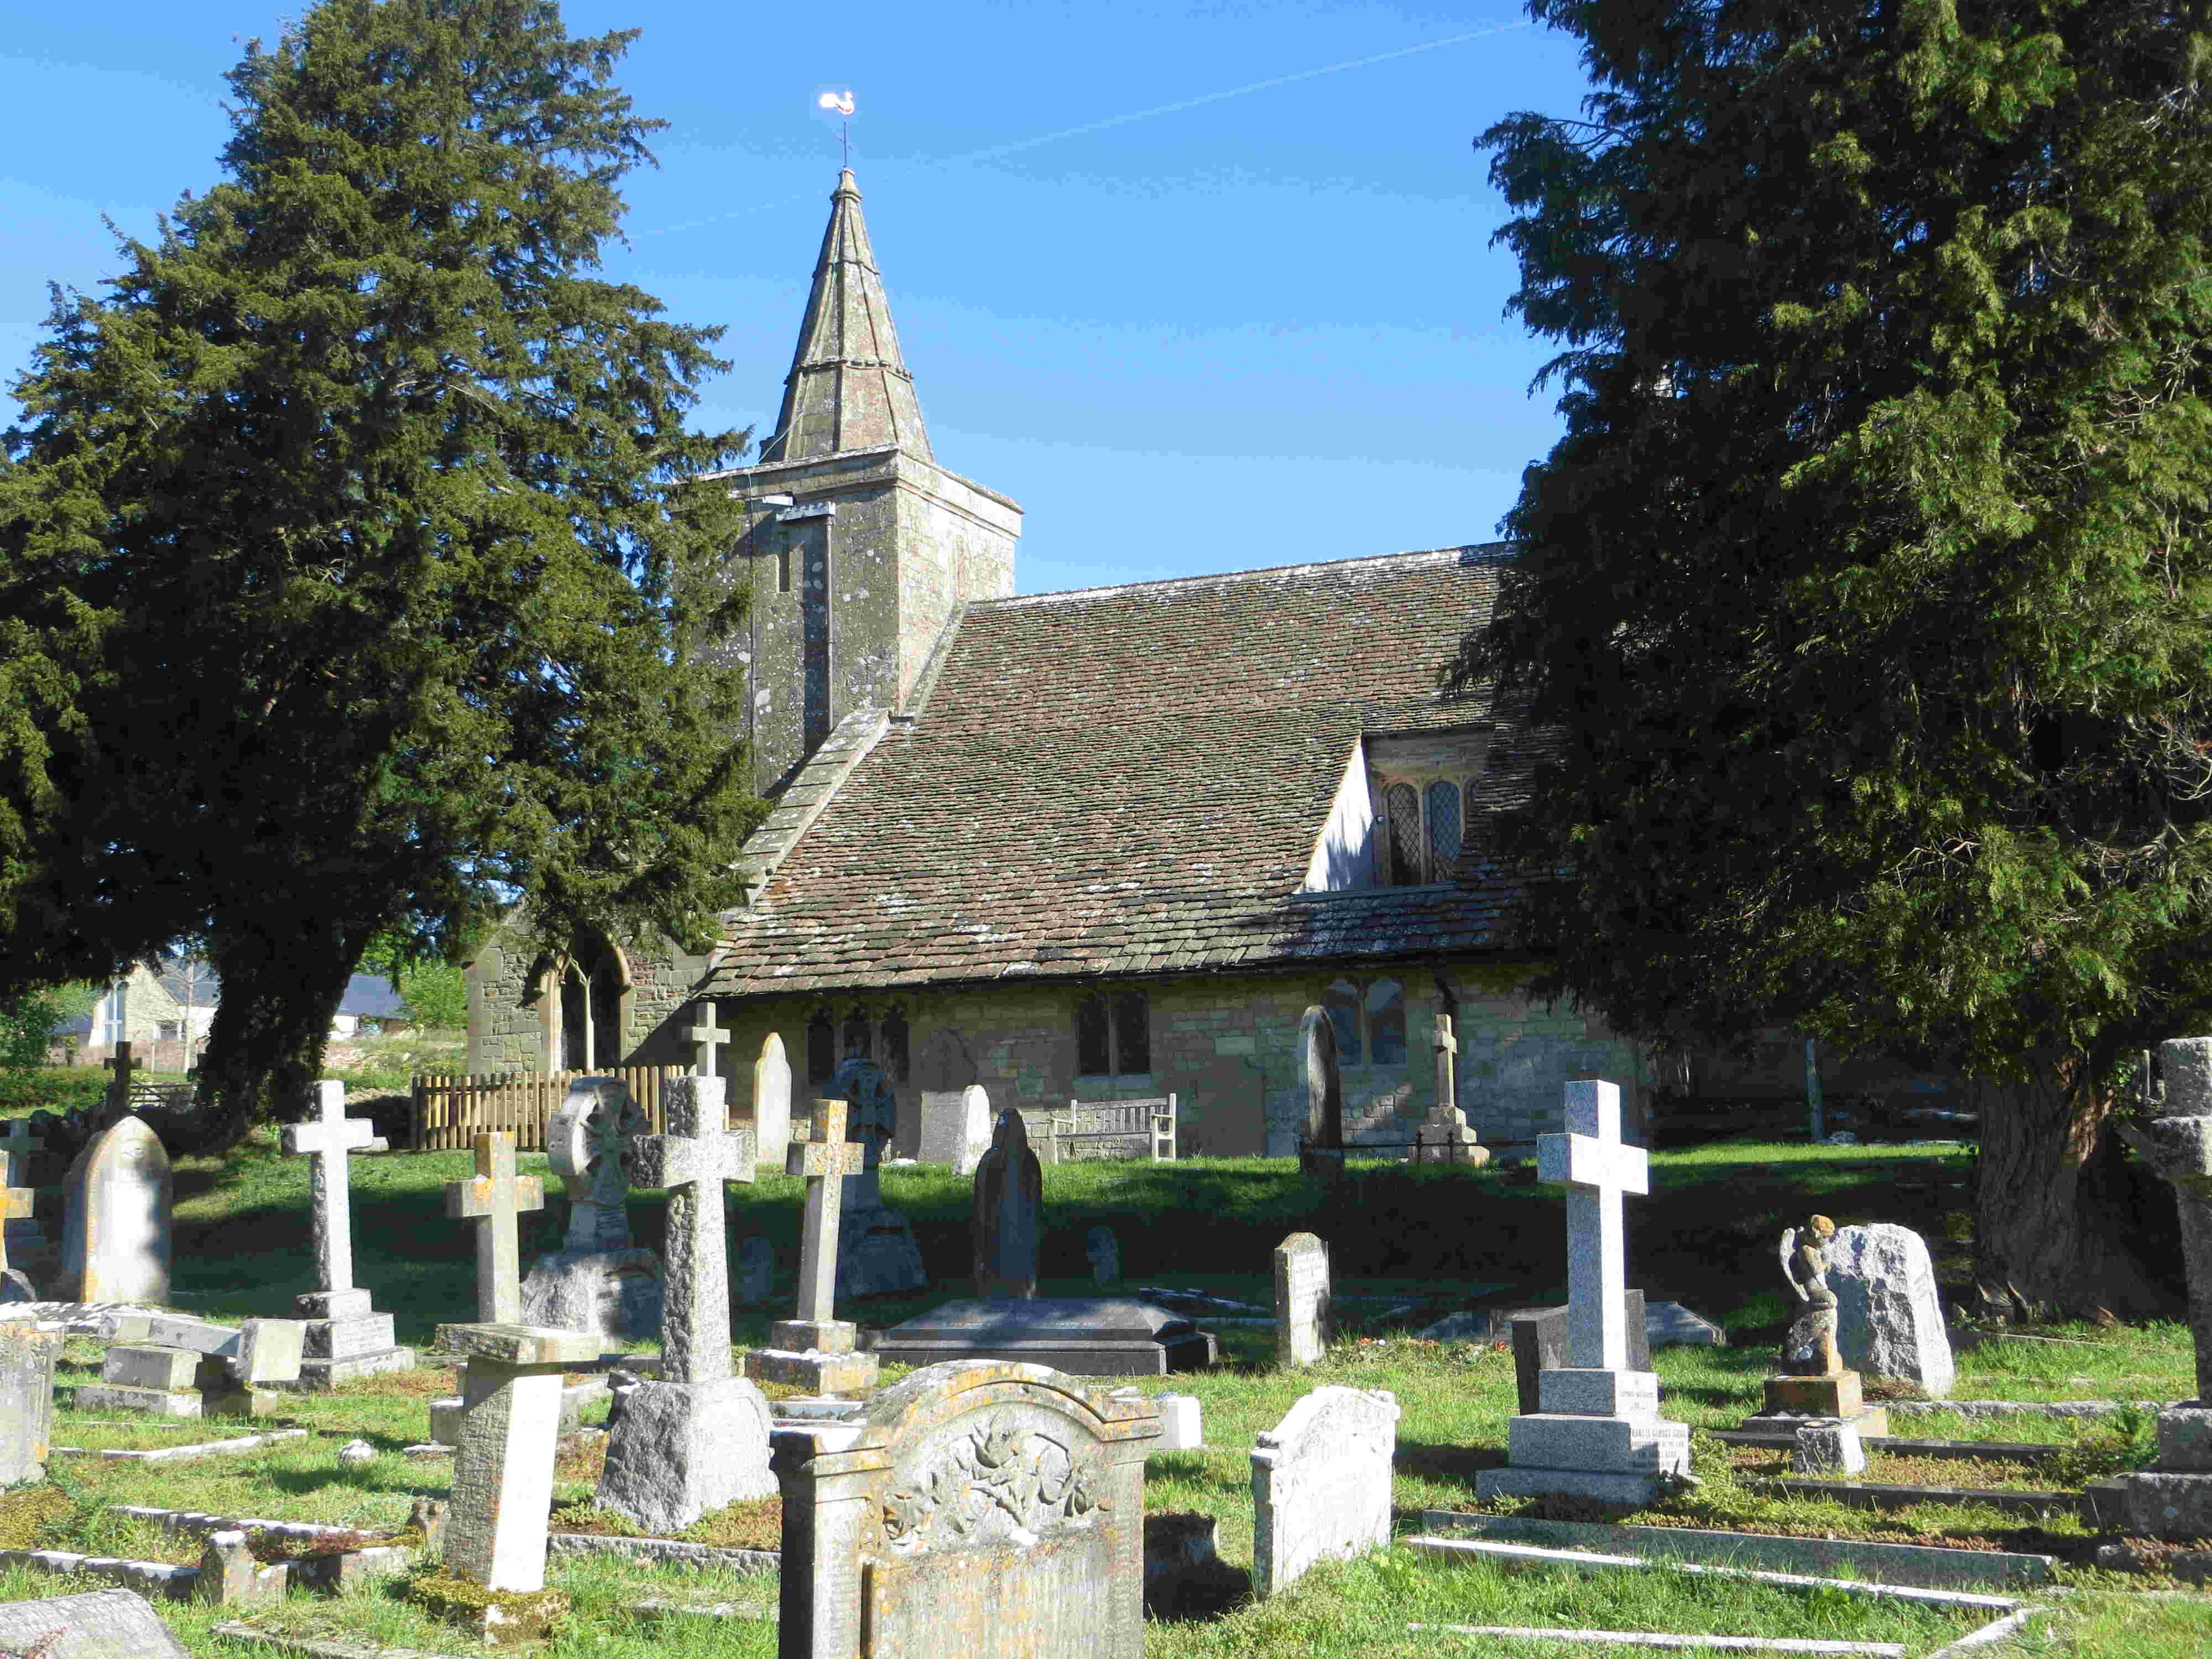 Limpley Stoke Curch